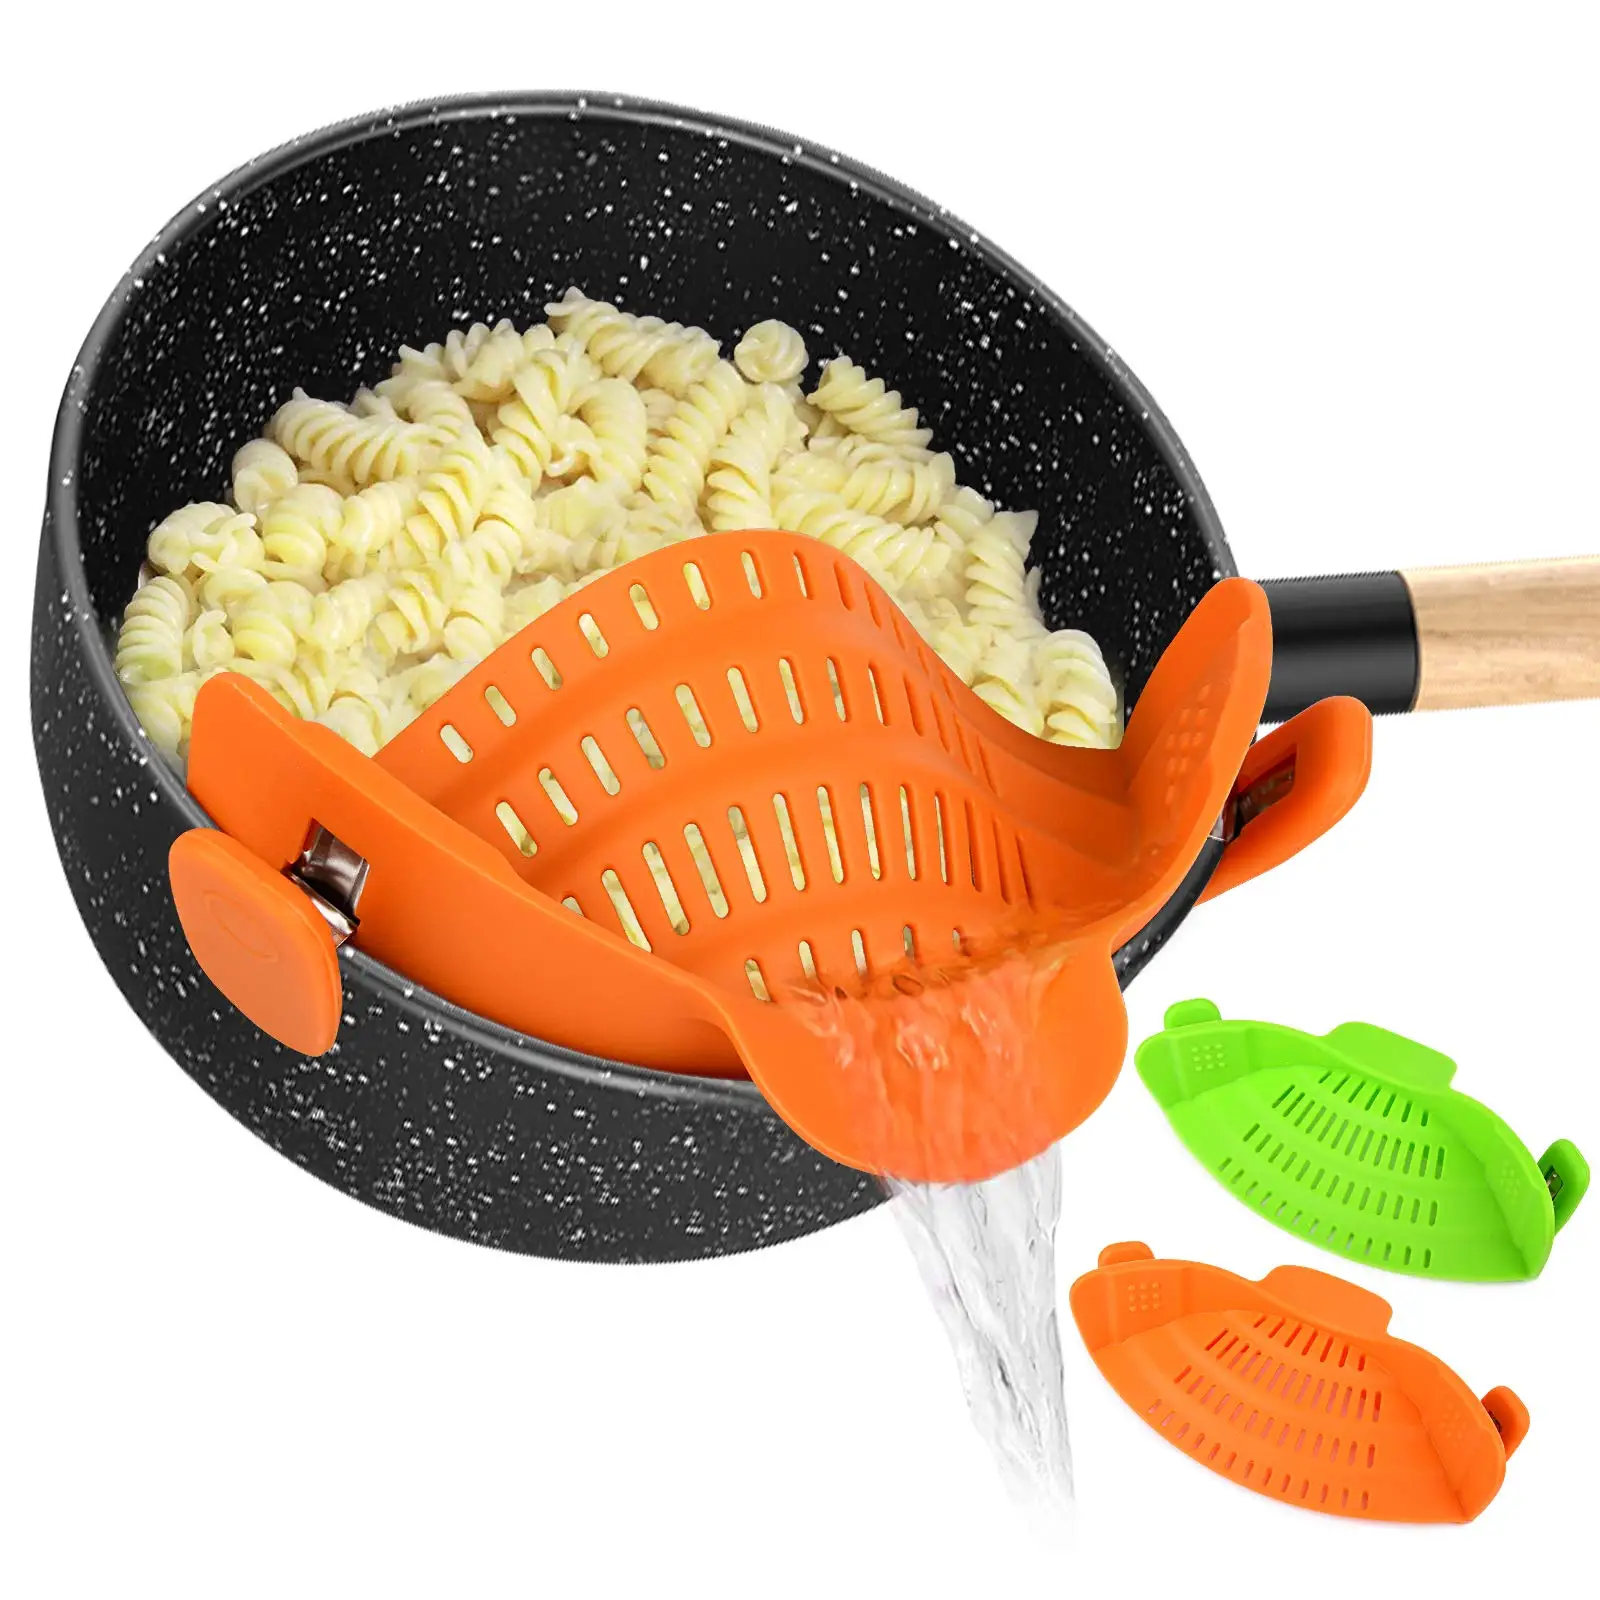 

Food Strainer BPA Free Silicone Fit All Size Pod Strainer Pasta Meat Drainer Flexible Silicone Colander Fits